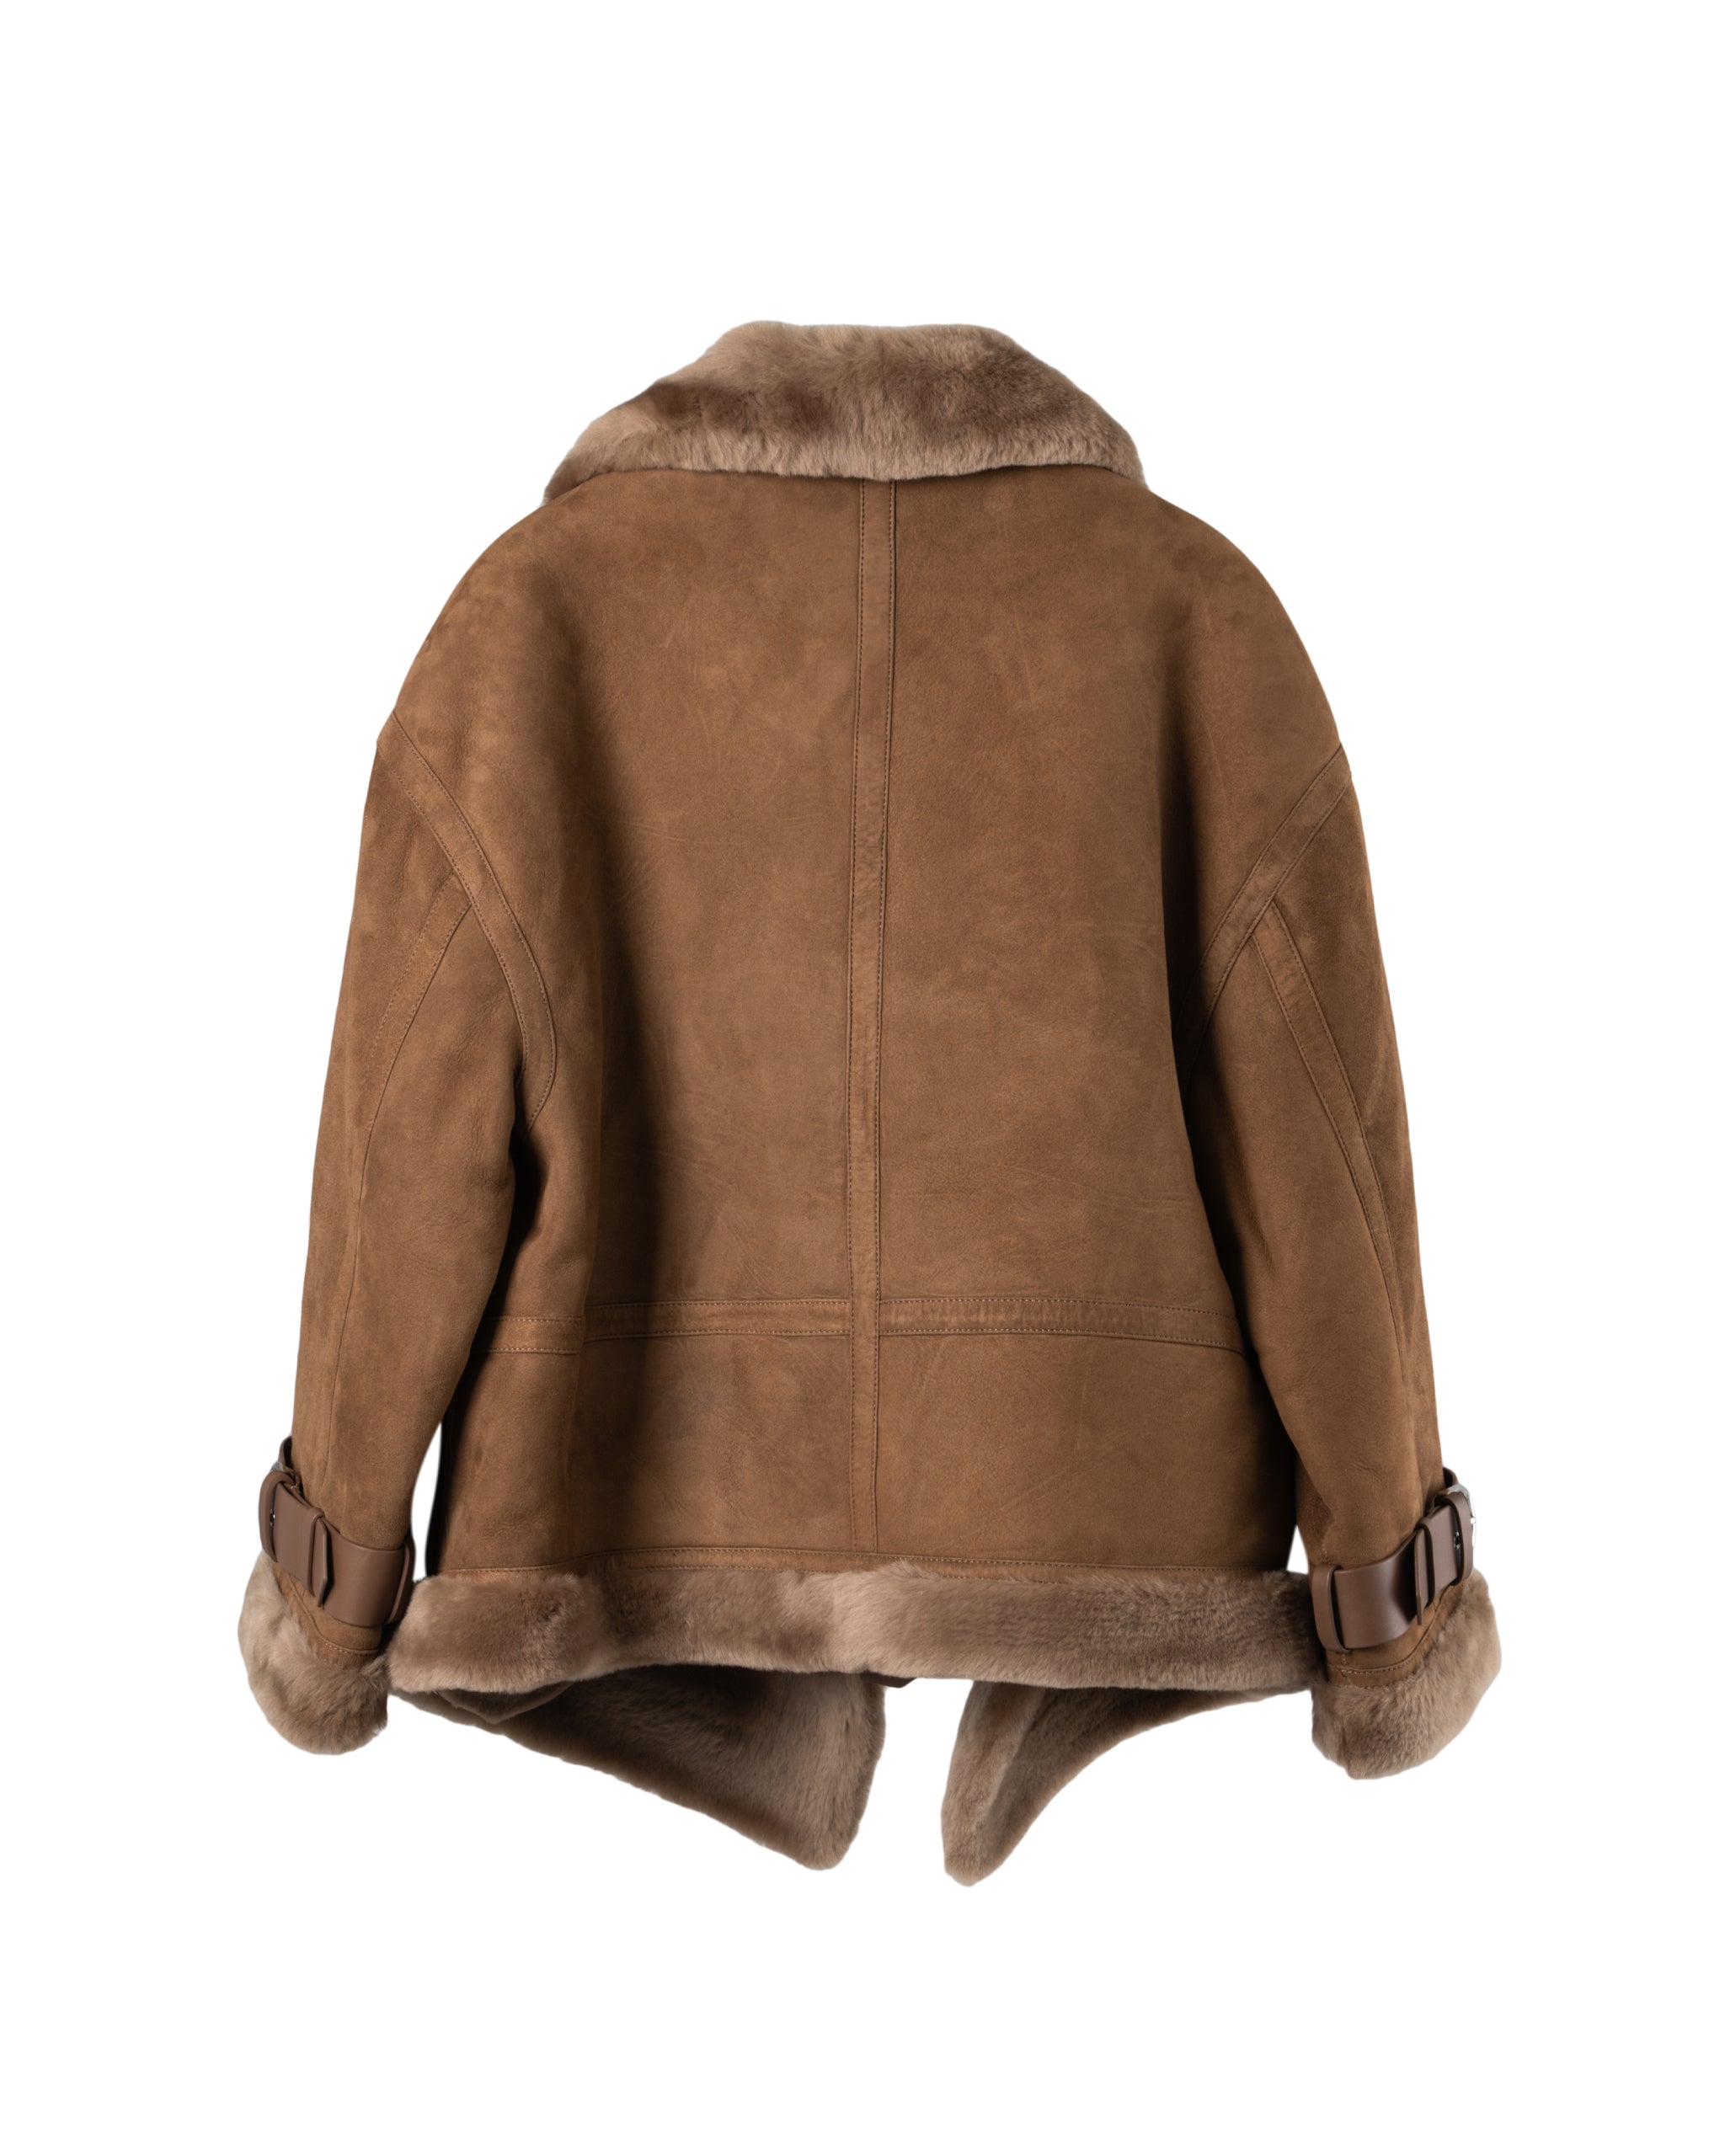 DARLING SUEDE SHEARLING BOMBER